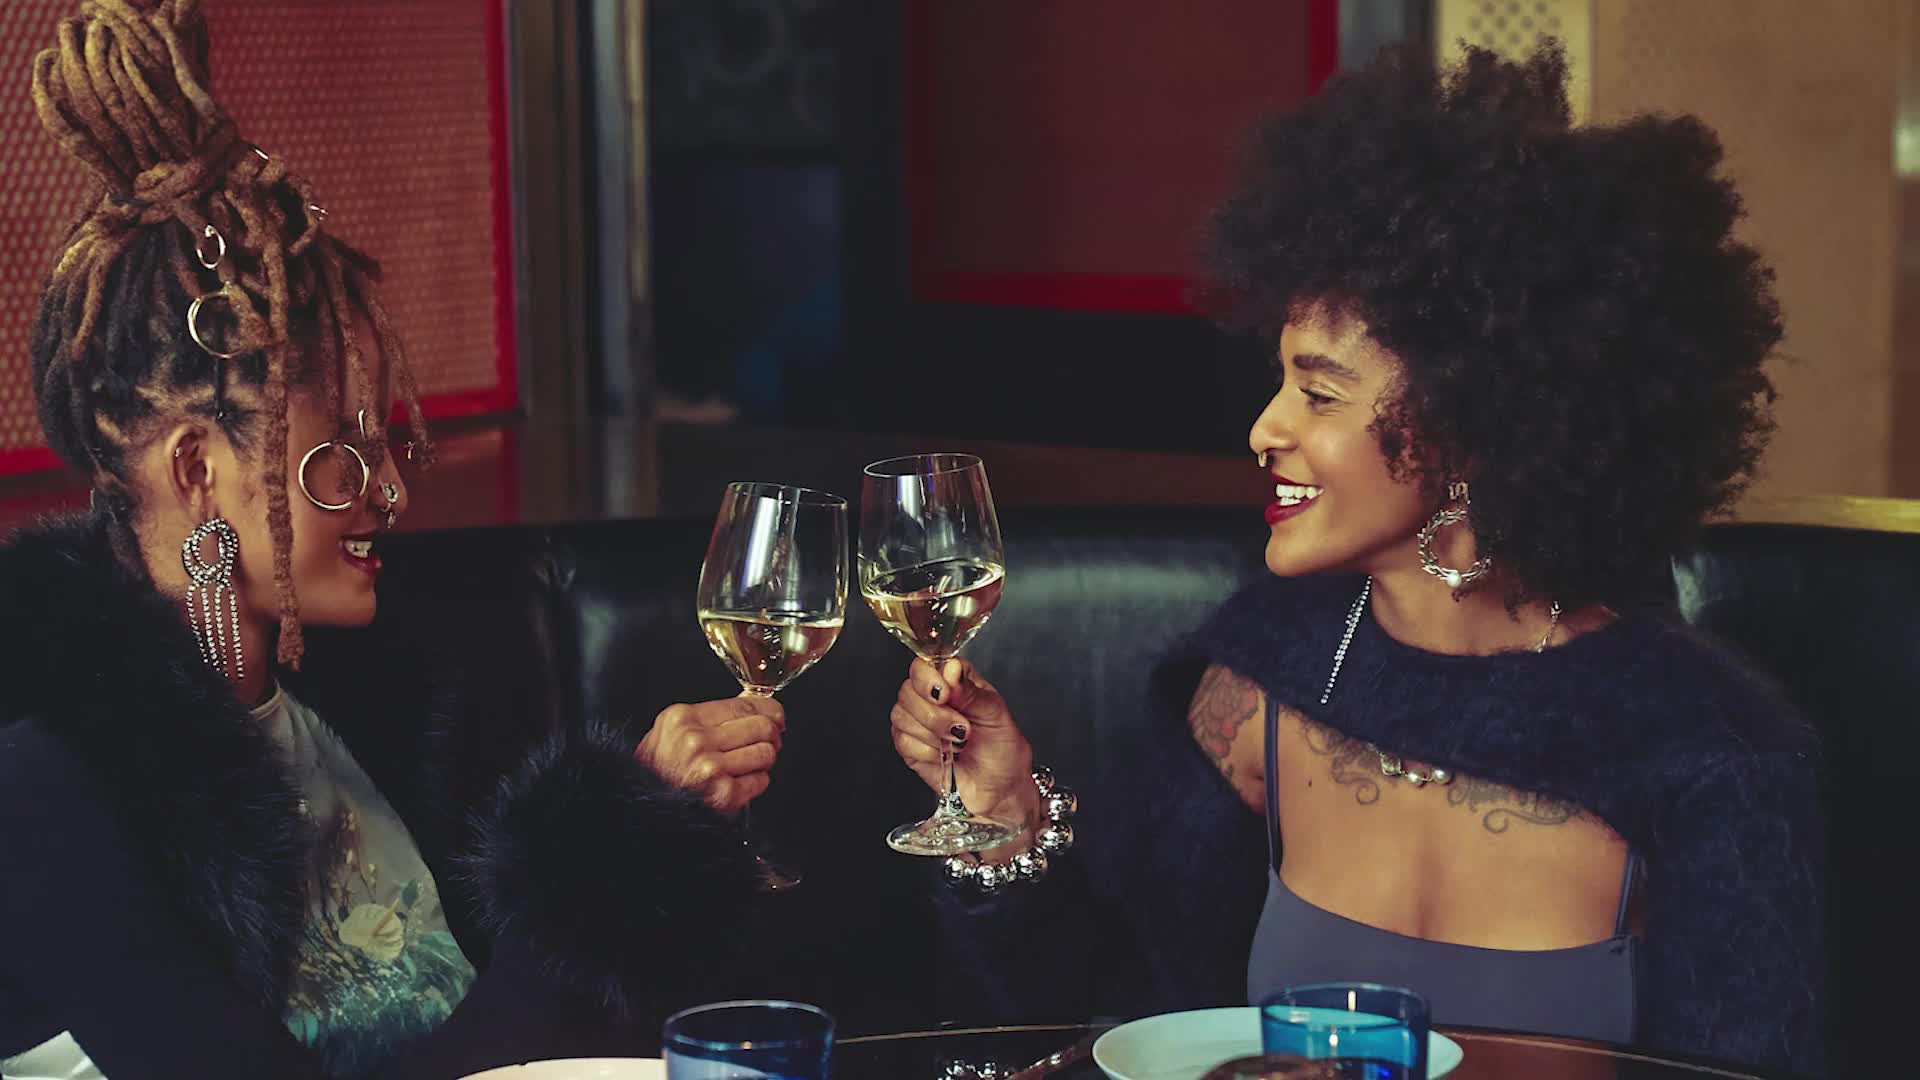 Watch Chain Reaction: Coco & Breezy's Night Out in Las Vegas